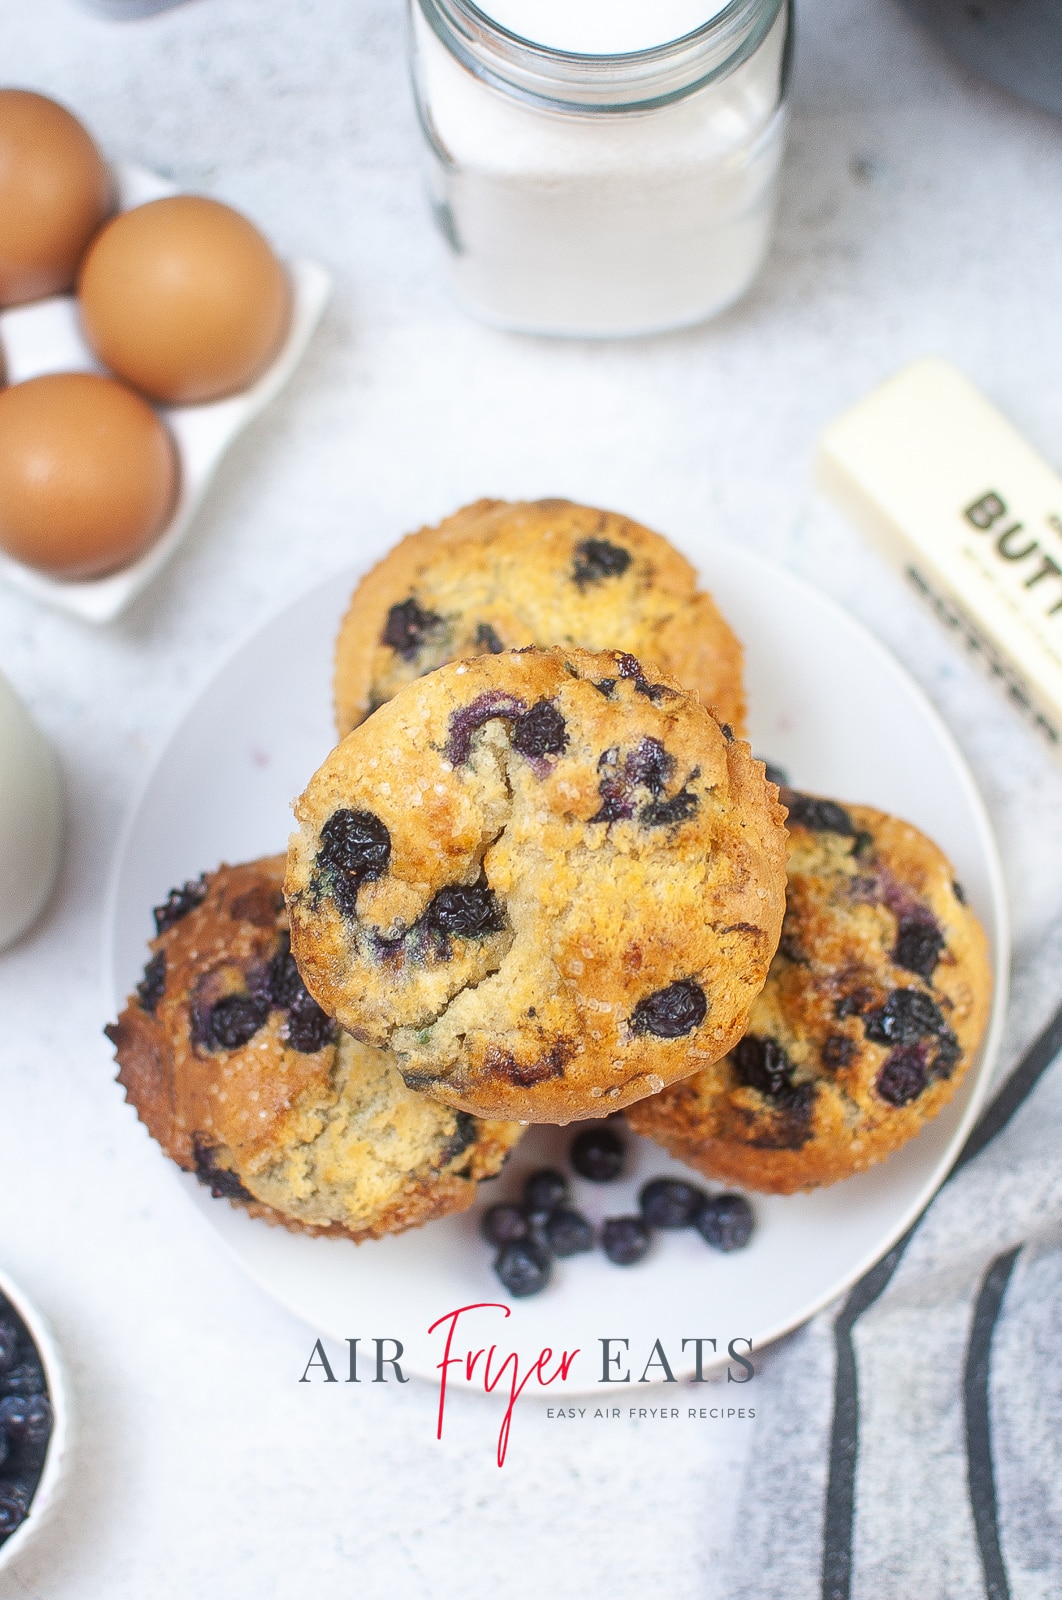 Vertical photo of an overhead shot of a plate with 4 blueberry muffins and a few loose blueberries. Eggs, sugar, butter and blueberries are around the plate, all on a white surface